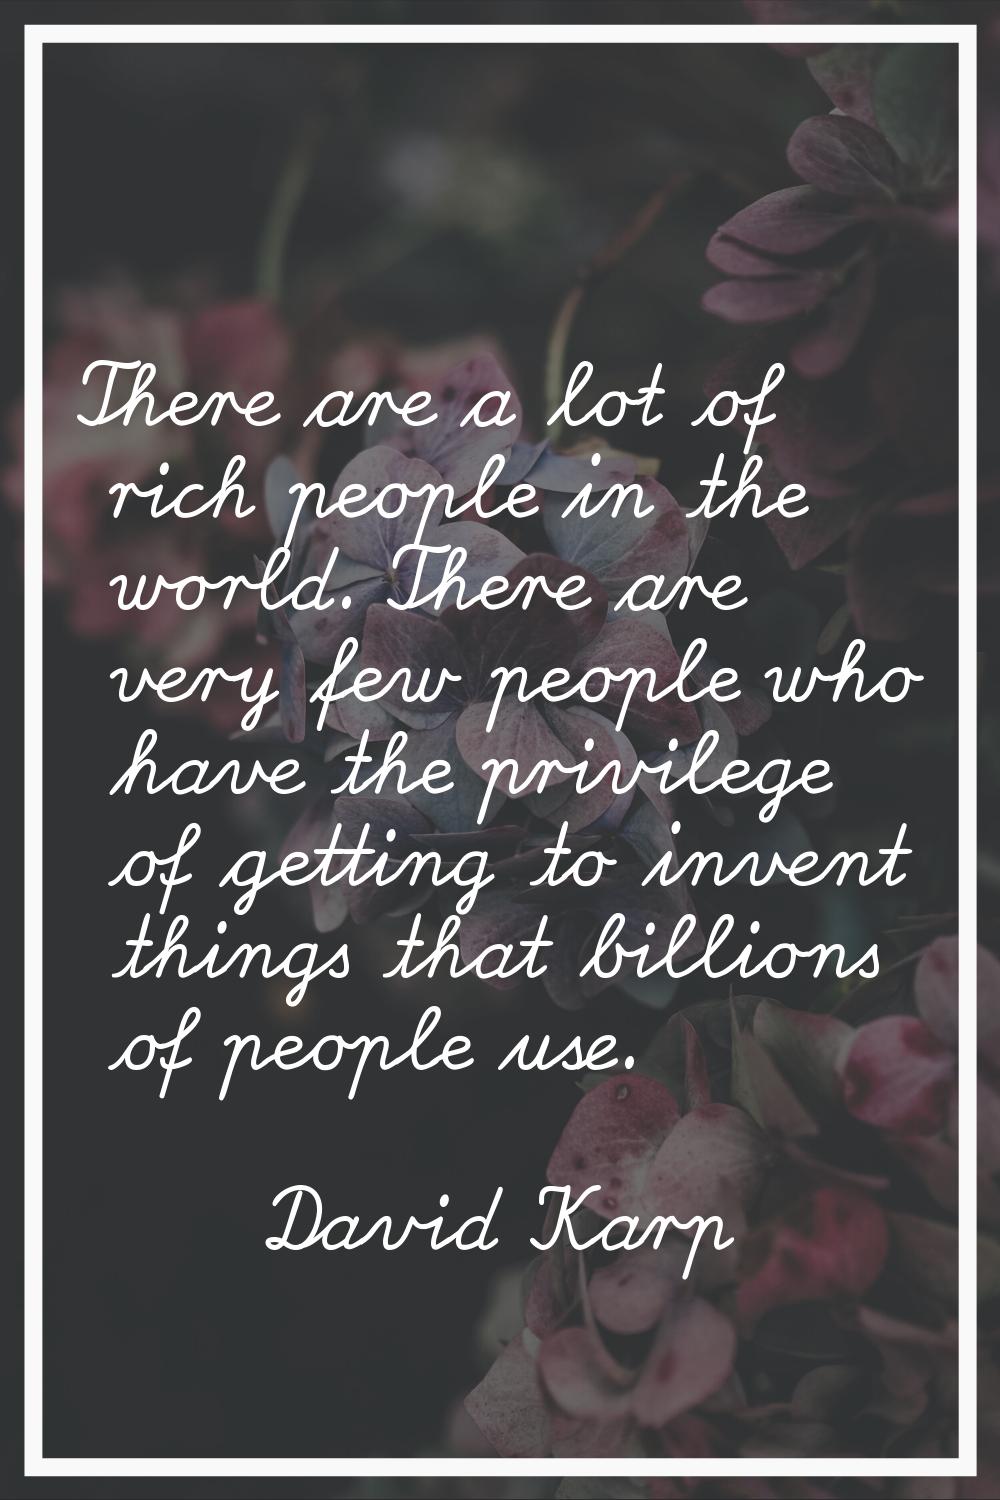 There are a lot of rich people in the world. There are very few people who have the privilege of ge